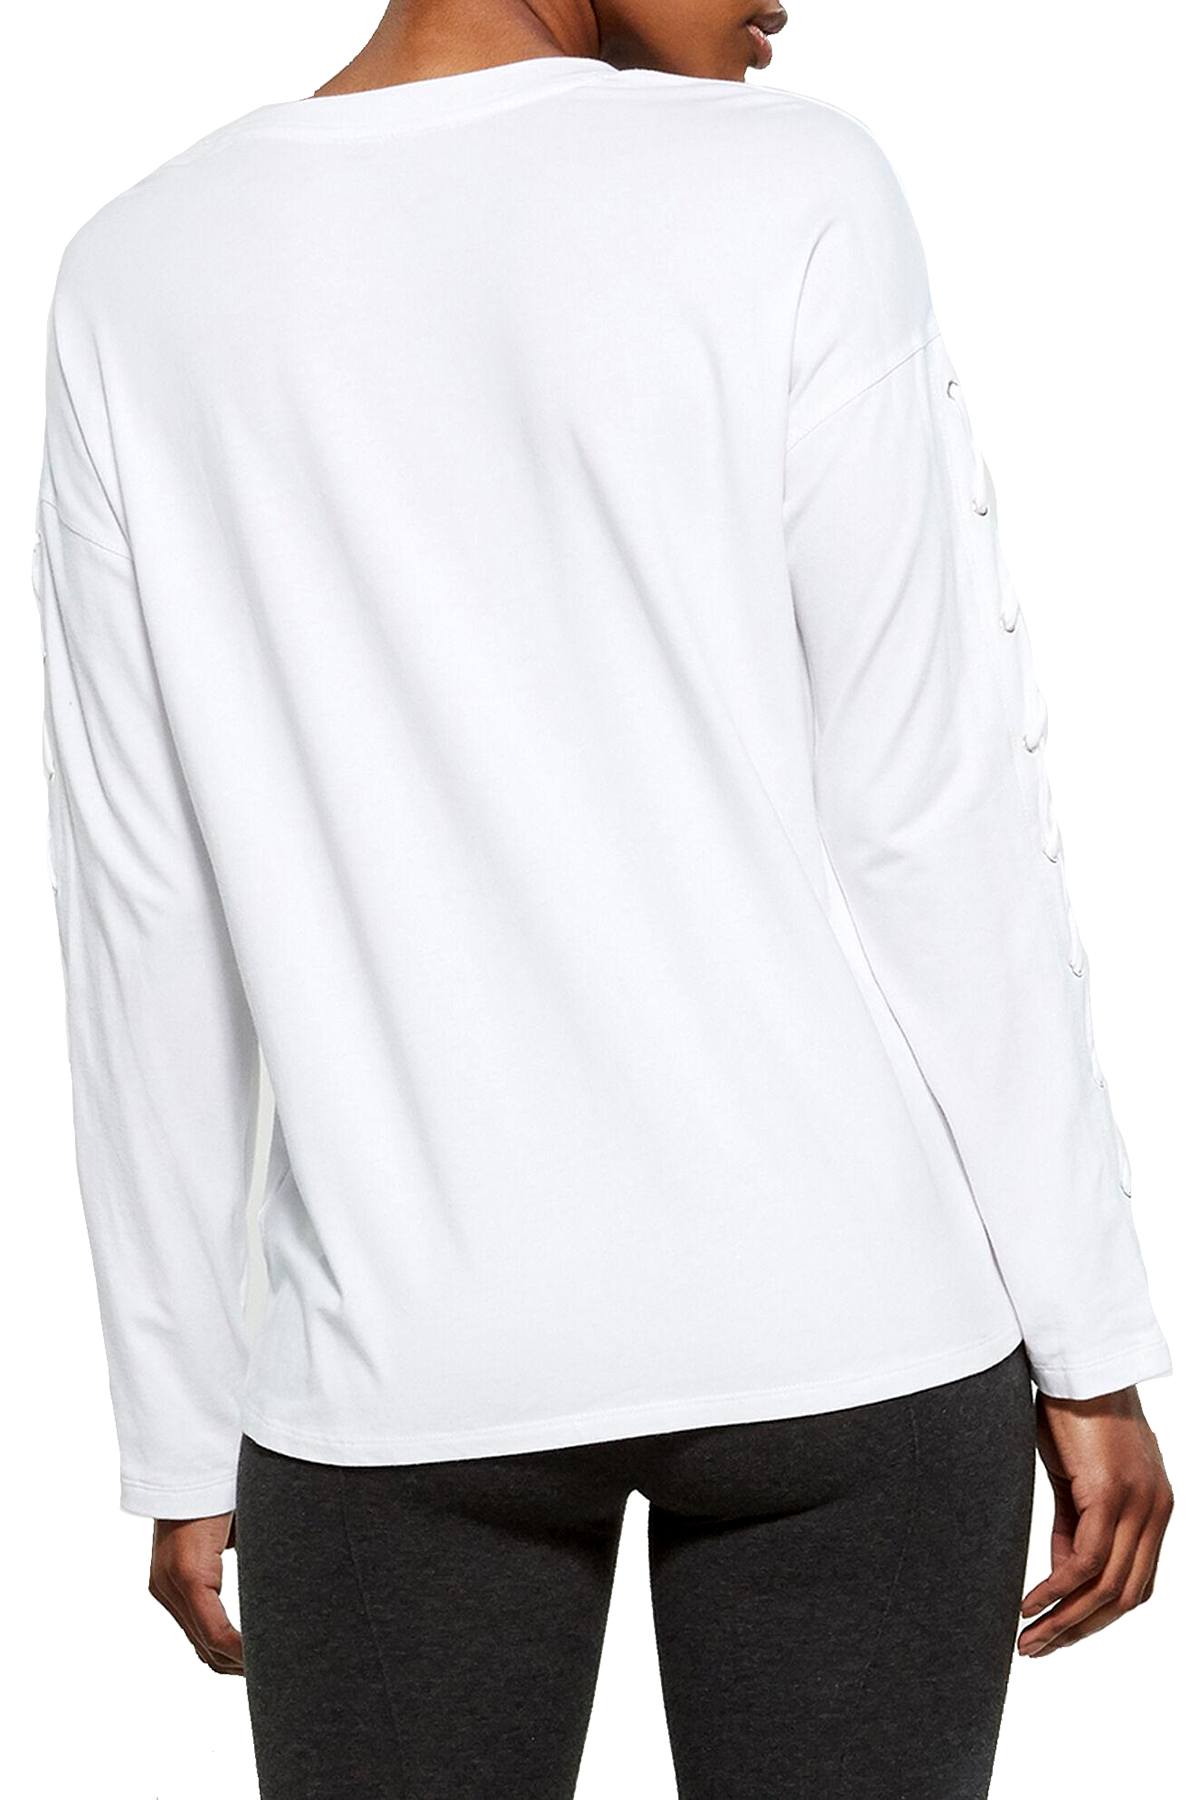 DKNY Sport White Long Lace-Up Sleeves Modal T-Shirt